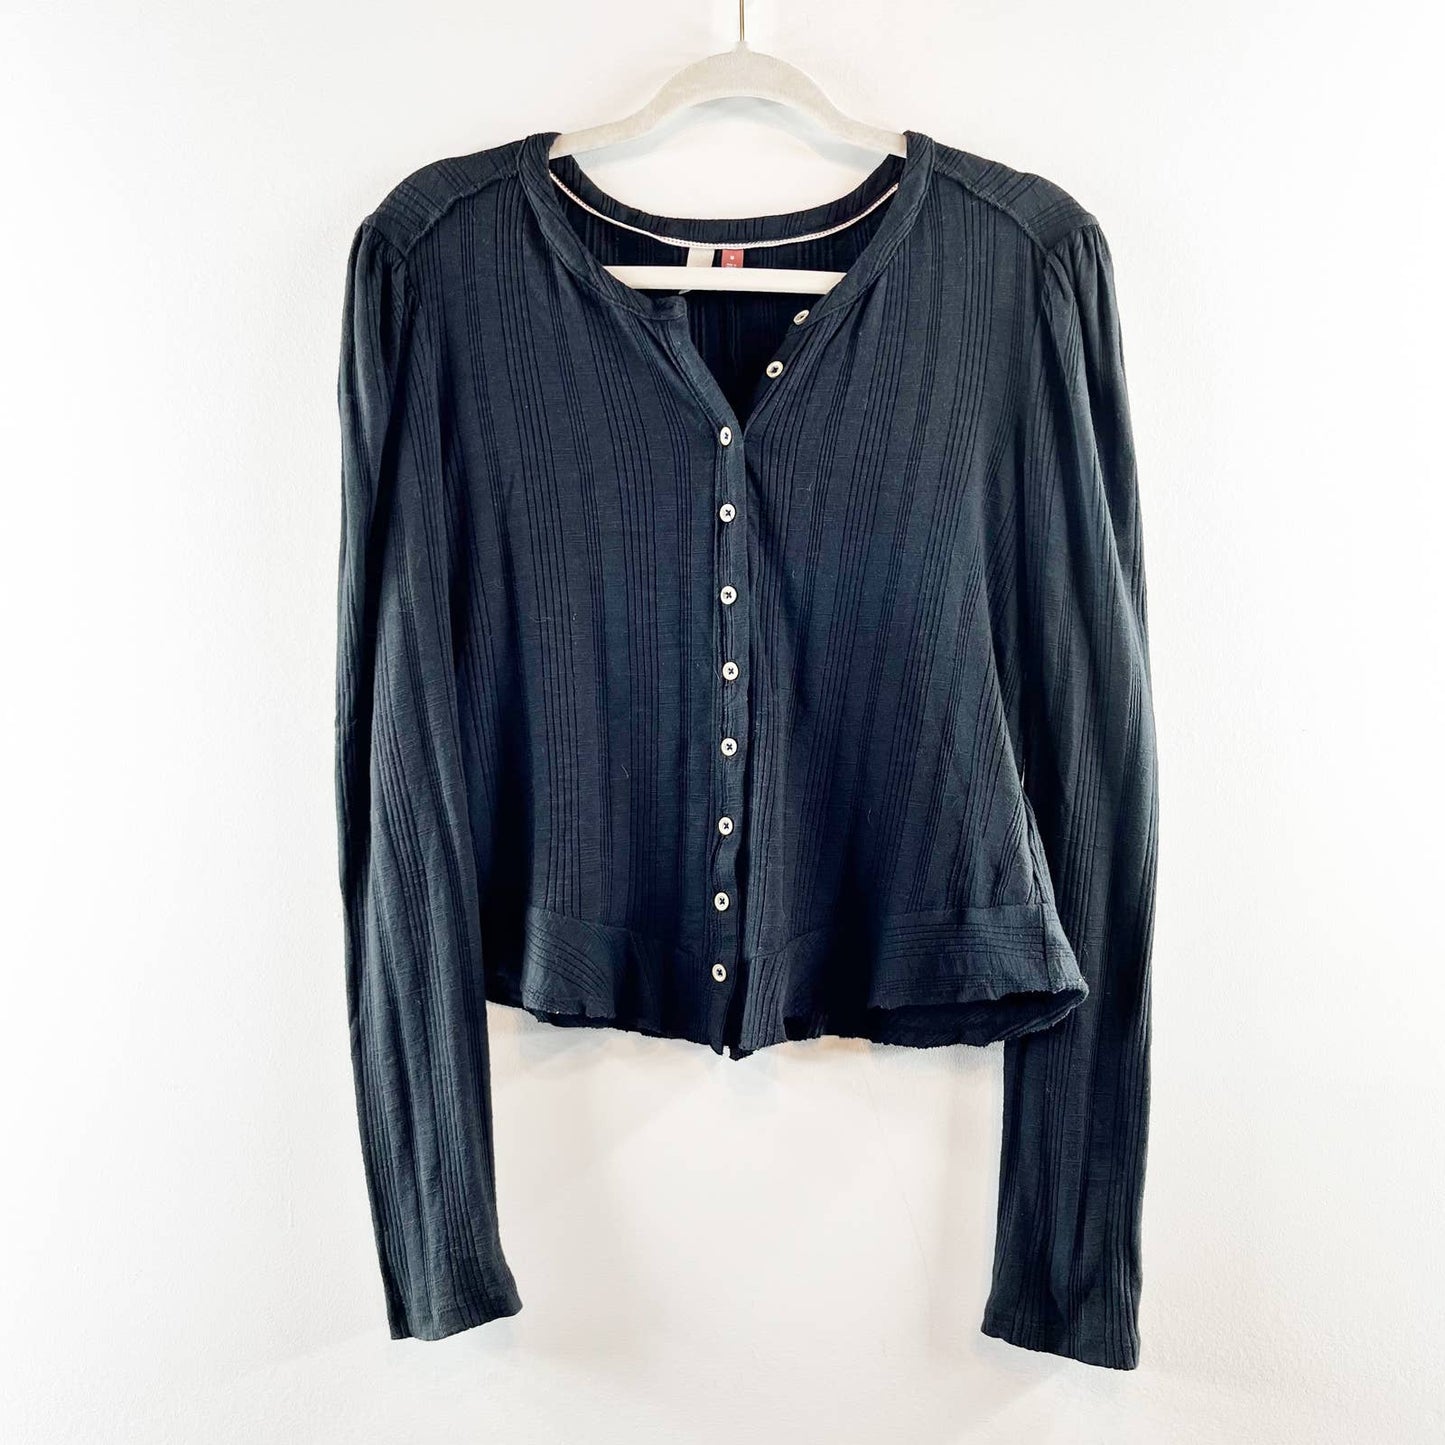 Pilcro Anthropologie Ribbed Puff-Long Sleeved Button Up Top Sweater Black Medium